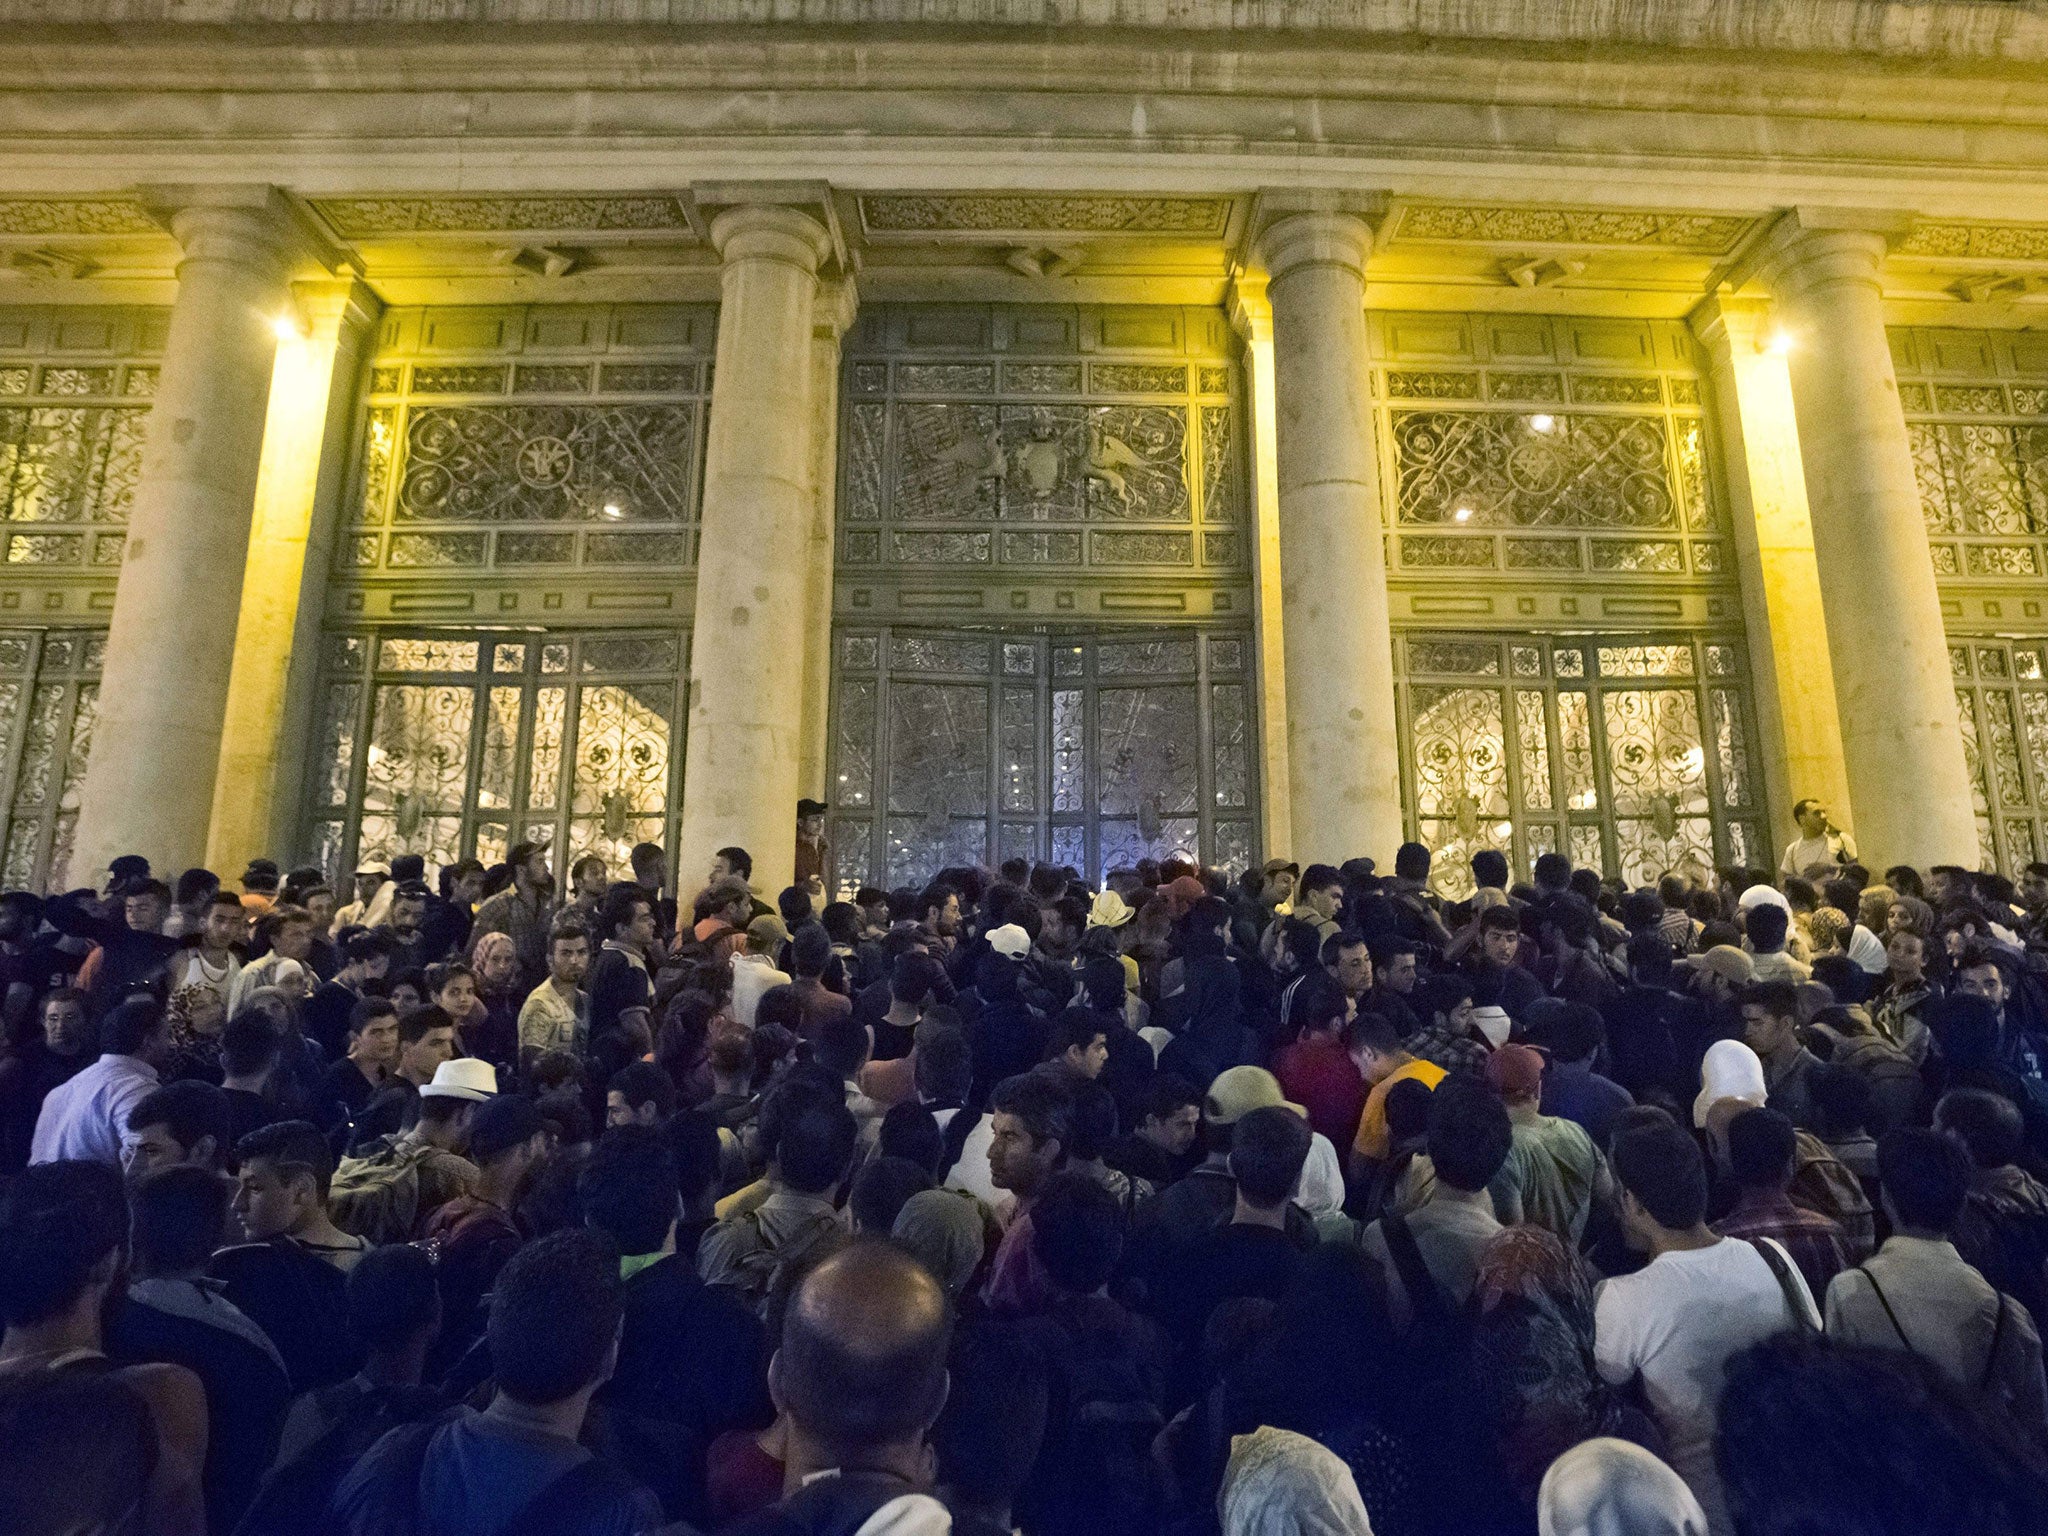 Migrants wait to board a train to Germany at the Keleti Railway Station in Budapest, Hungary, 1 September 2015